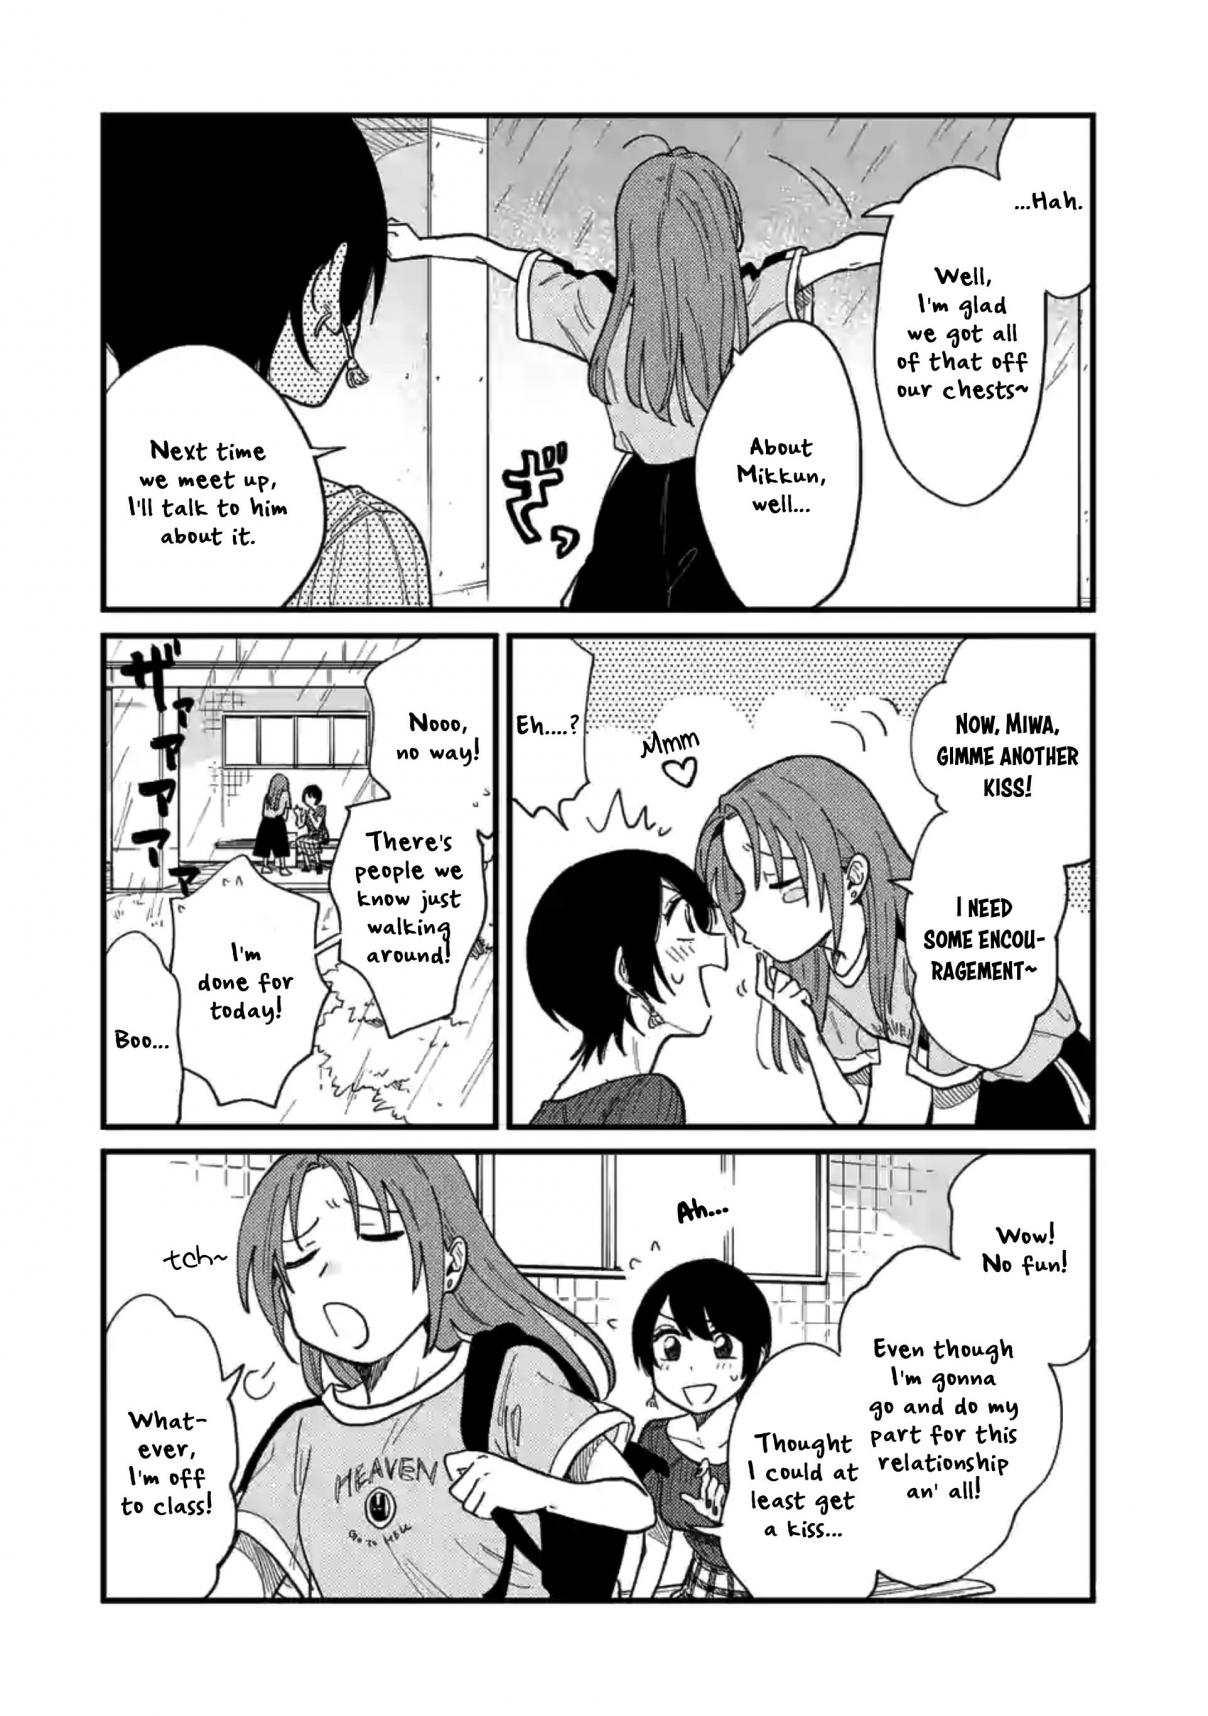 So, Do You Want To Go Out, Or? Ch. 4